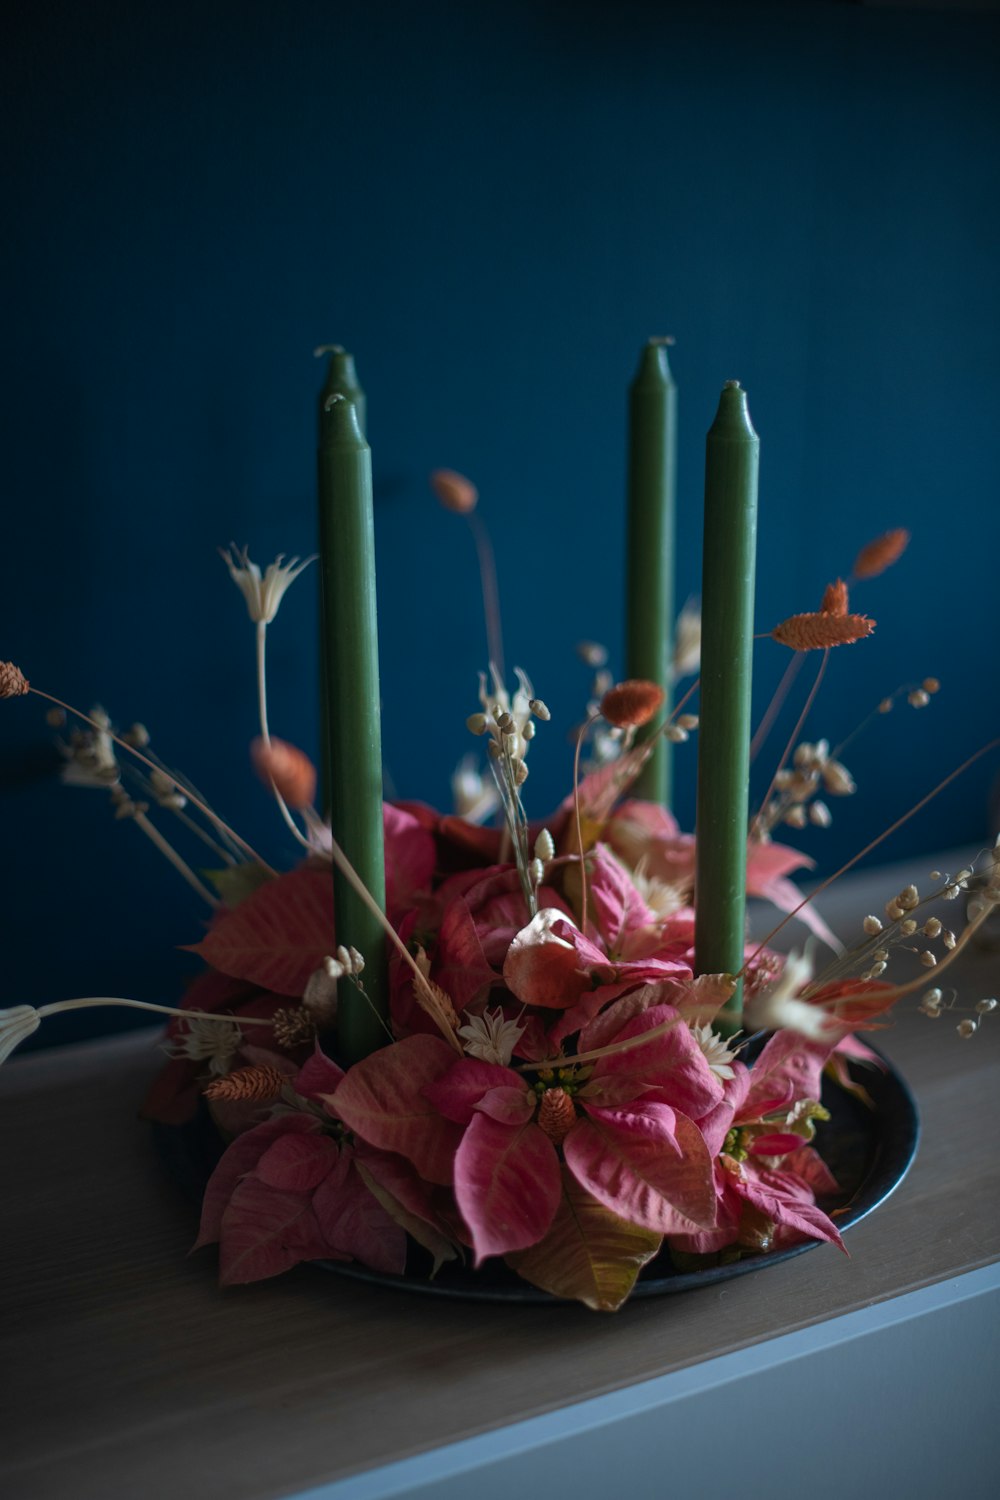 a plate with candles and flowers on a table